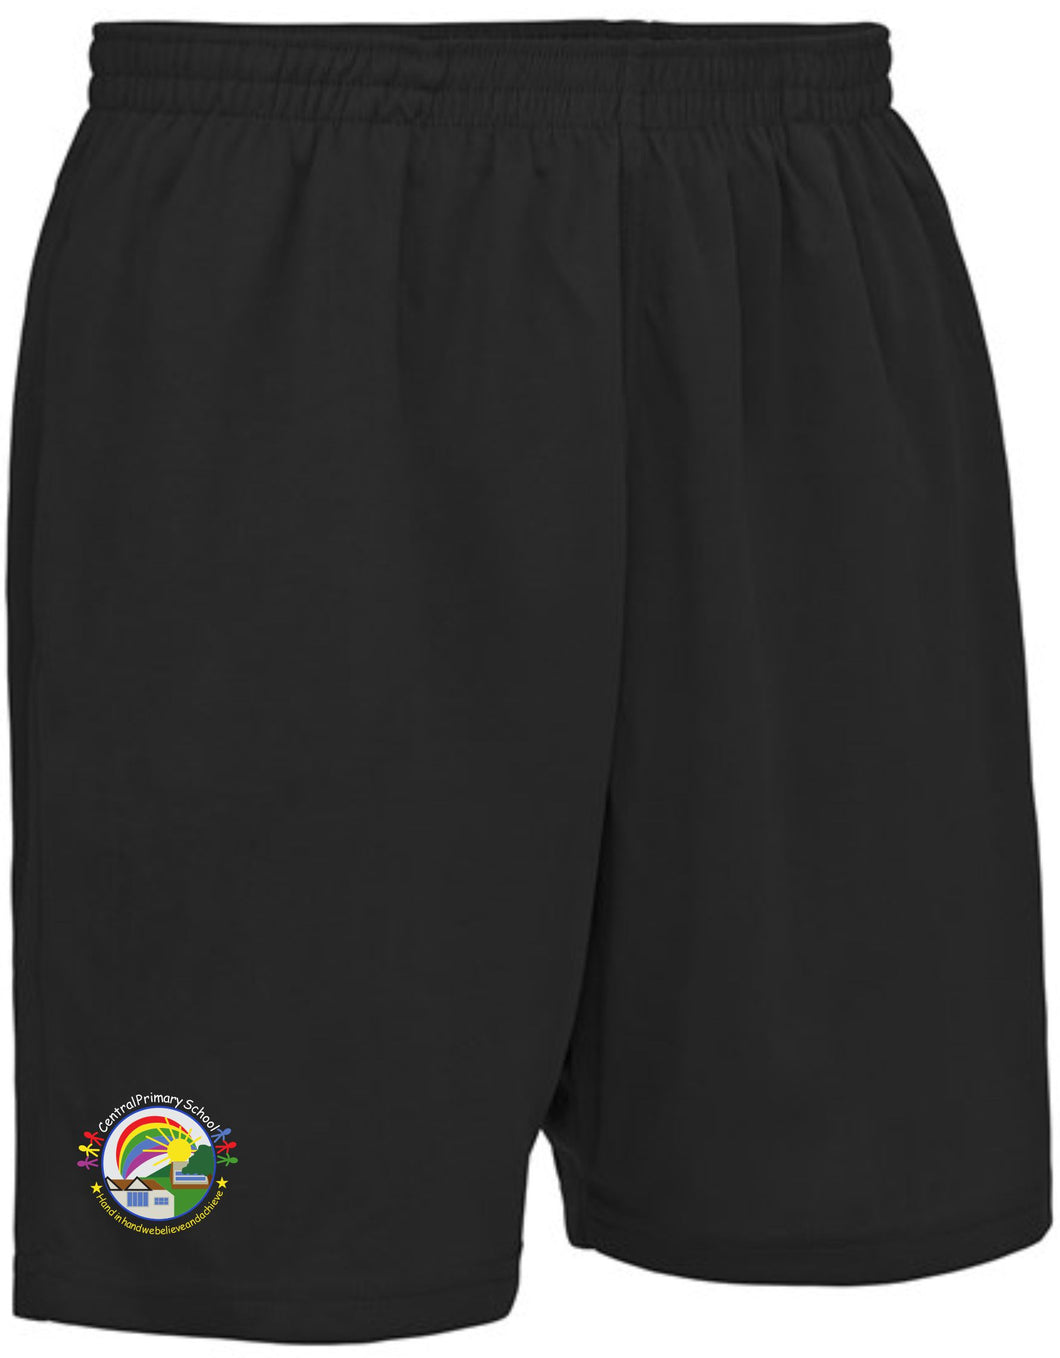 Central Unisex PE Short (NO REFUNDS OR EXCHANGES)